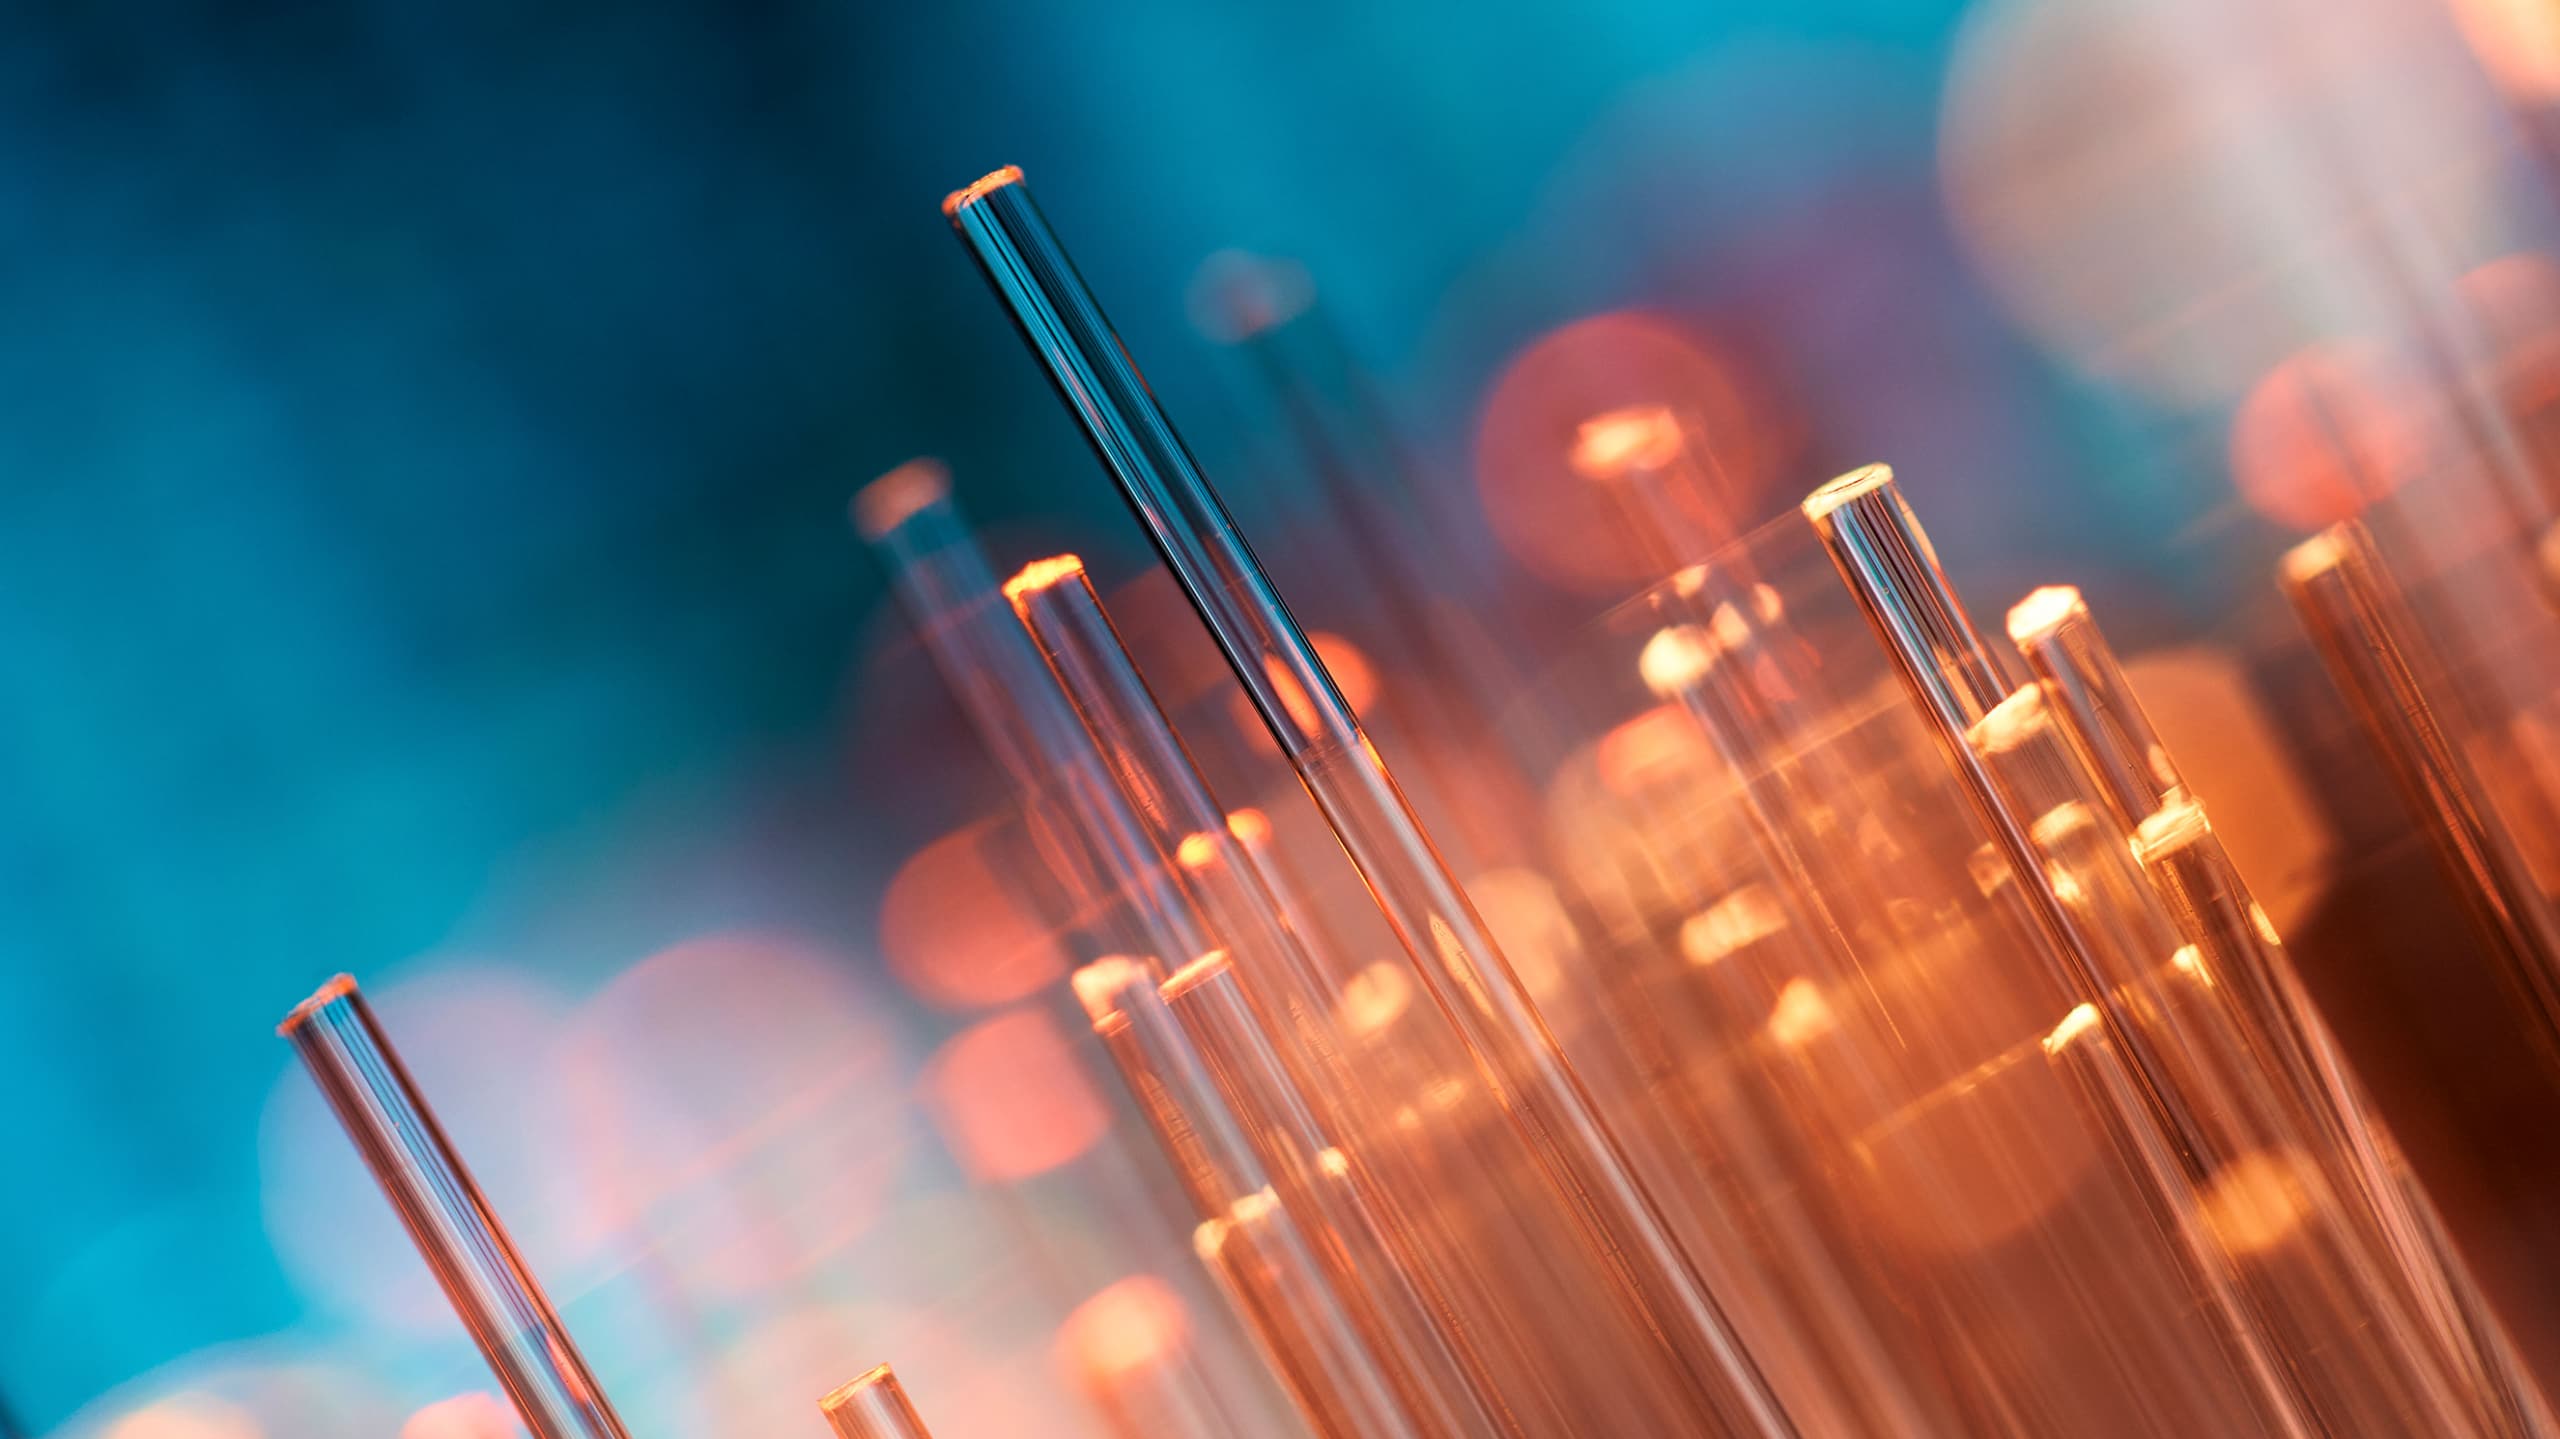 Close-up of optical fibers illuminated with a warm orange-blue light gradient, creating a glowing effect with blurred background DomainTools.